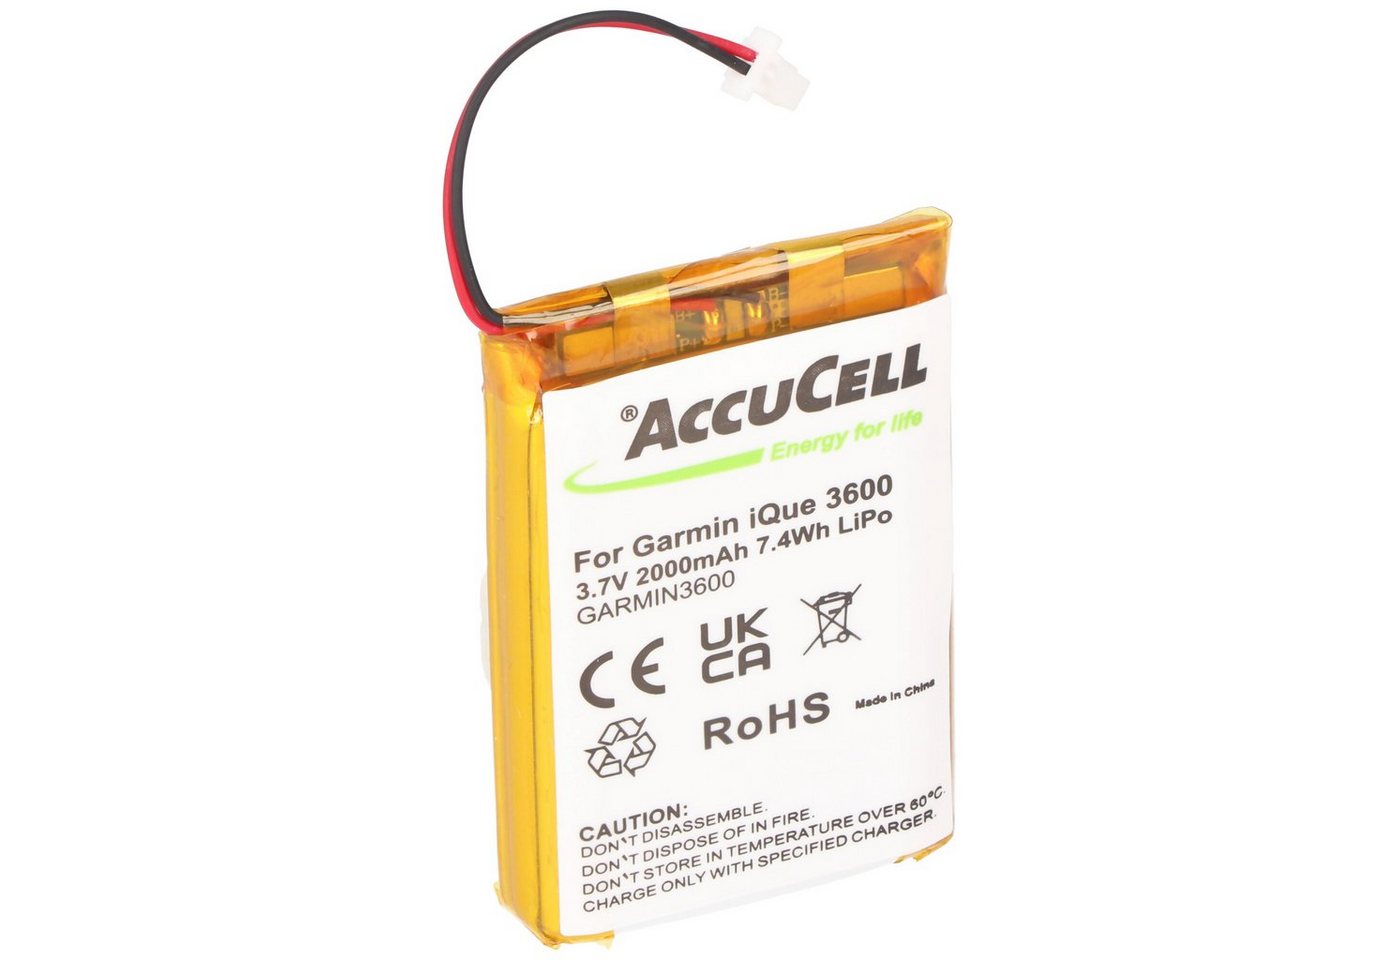 AccuCell AccuCell Akku passend für Garmin iQue 3200, 2000mAh extended Akku 2000 mAh (3,7 V) von AccuCell